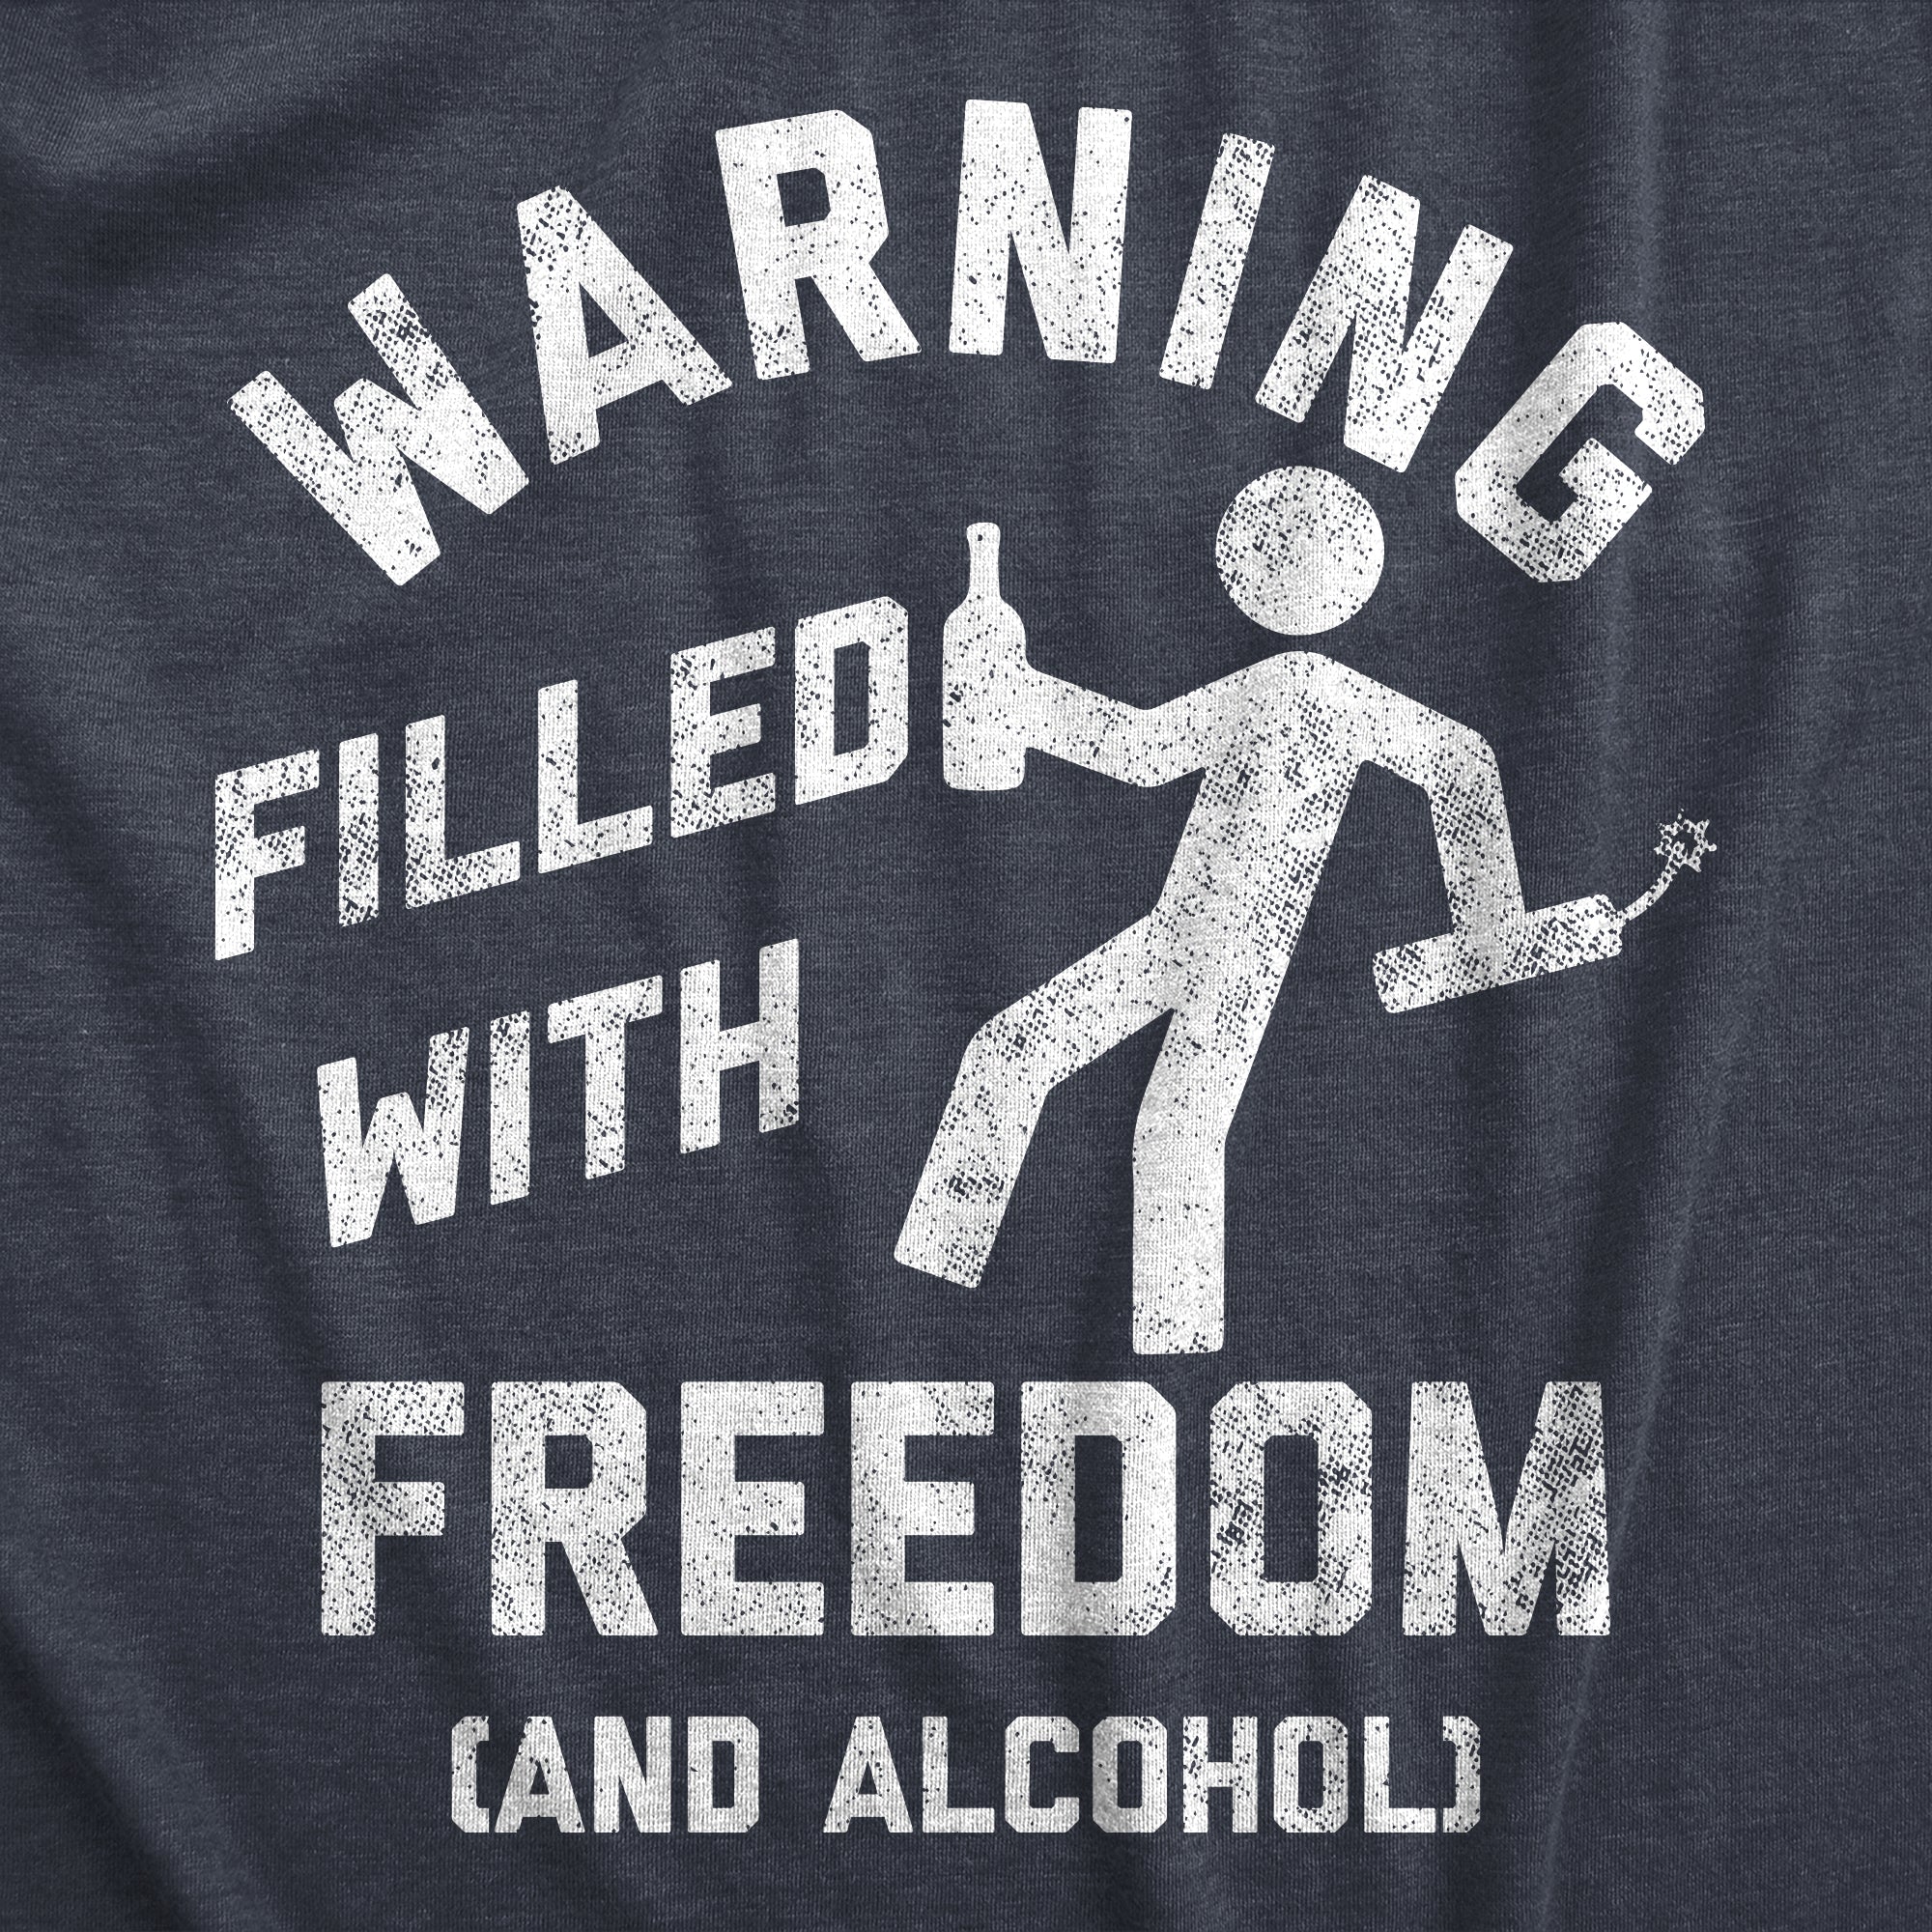 Funny Heather Navy - FREEDOM Warning Filled With Freedom And Alcohol Mens T Shirt Nerdy Fourth Of July Drinking Tee